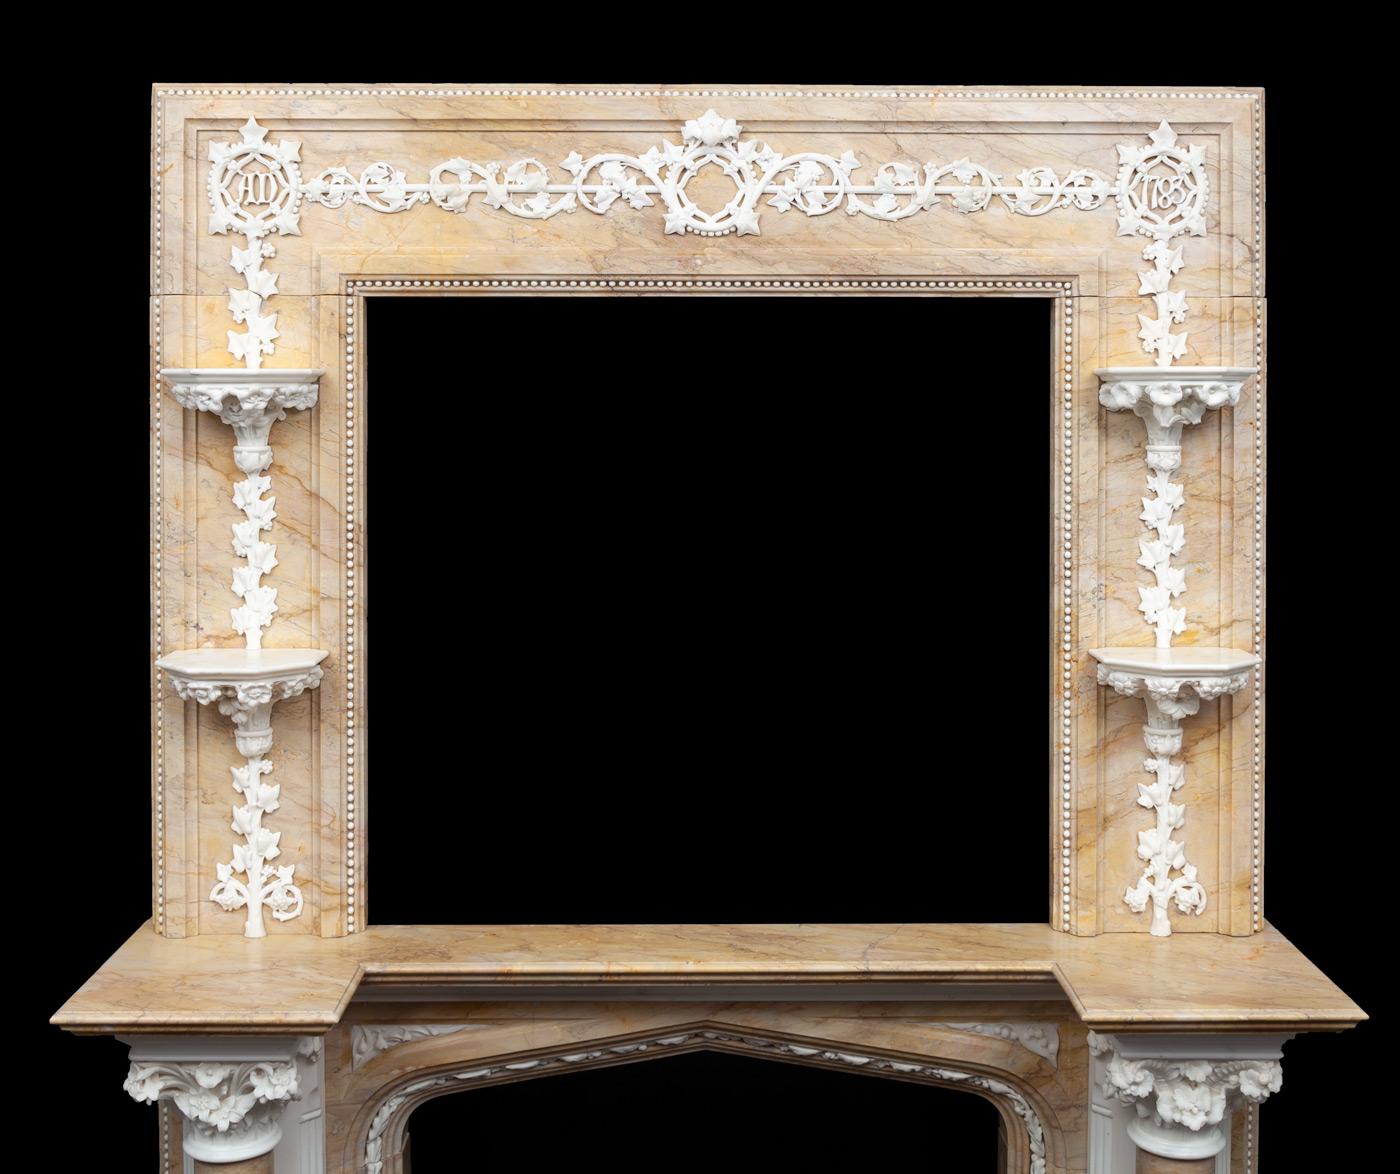 A magnificent and rare antique Statuary and Sienna marble fireplace. The lower half with full rounded Sienna columns on Statuary pilasters and with highly carved capitals, each one different. The arched opening decorated with a trail of carved